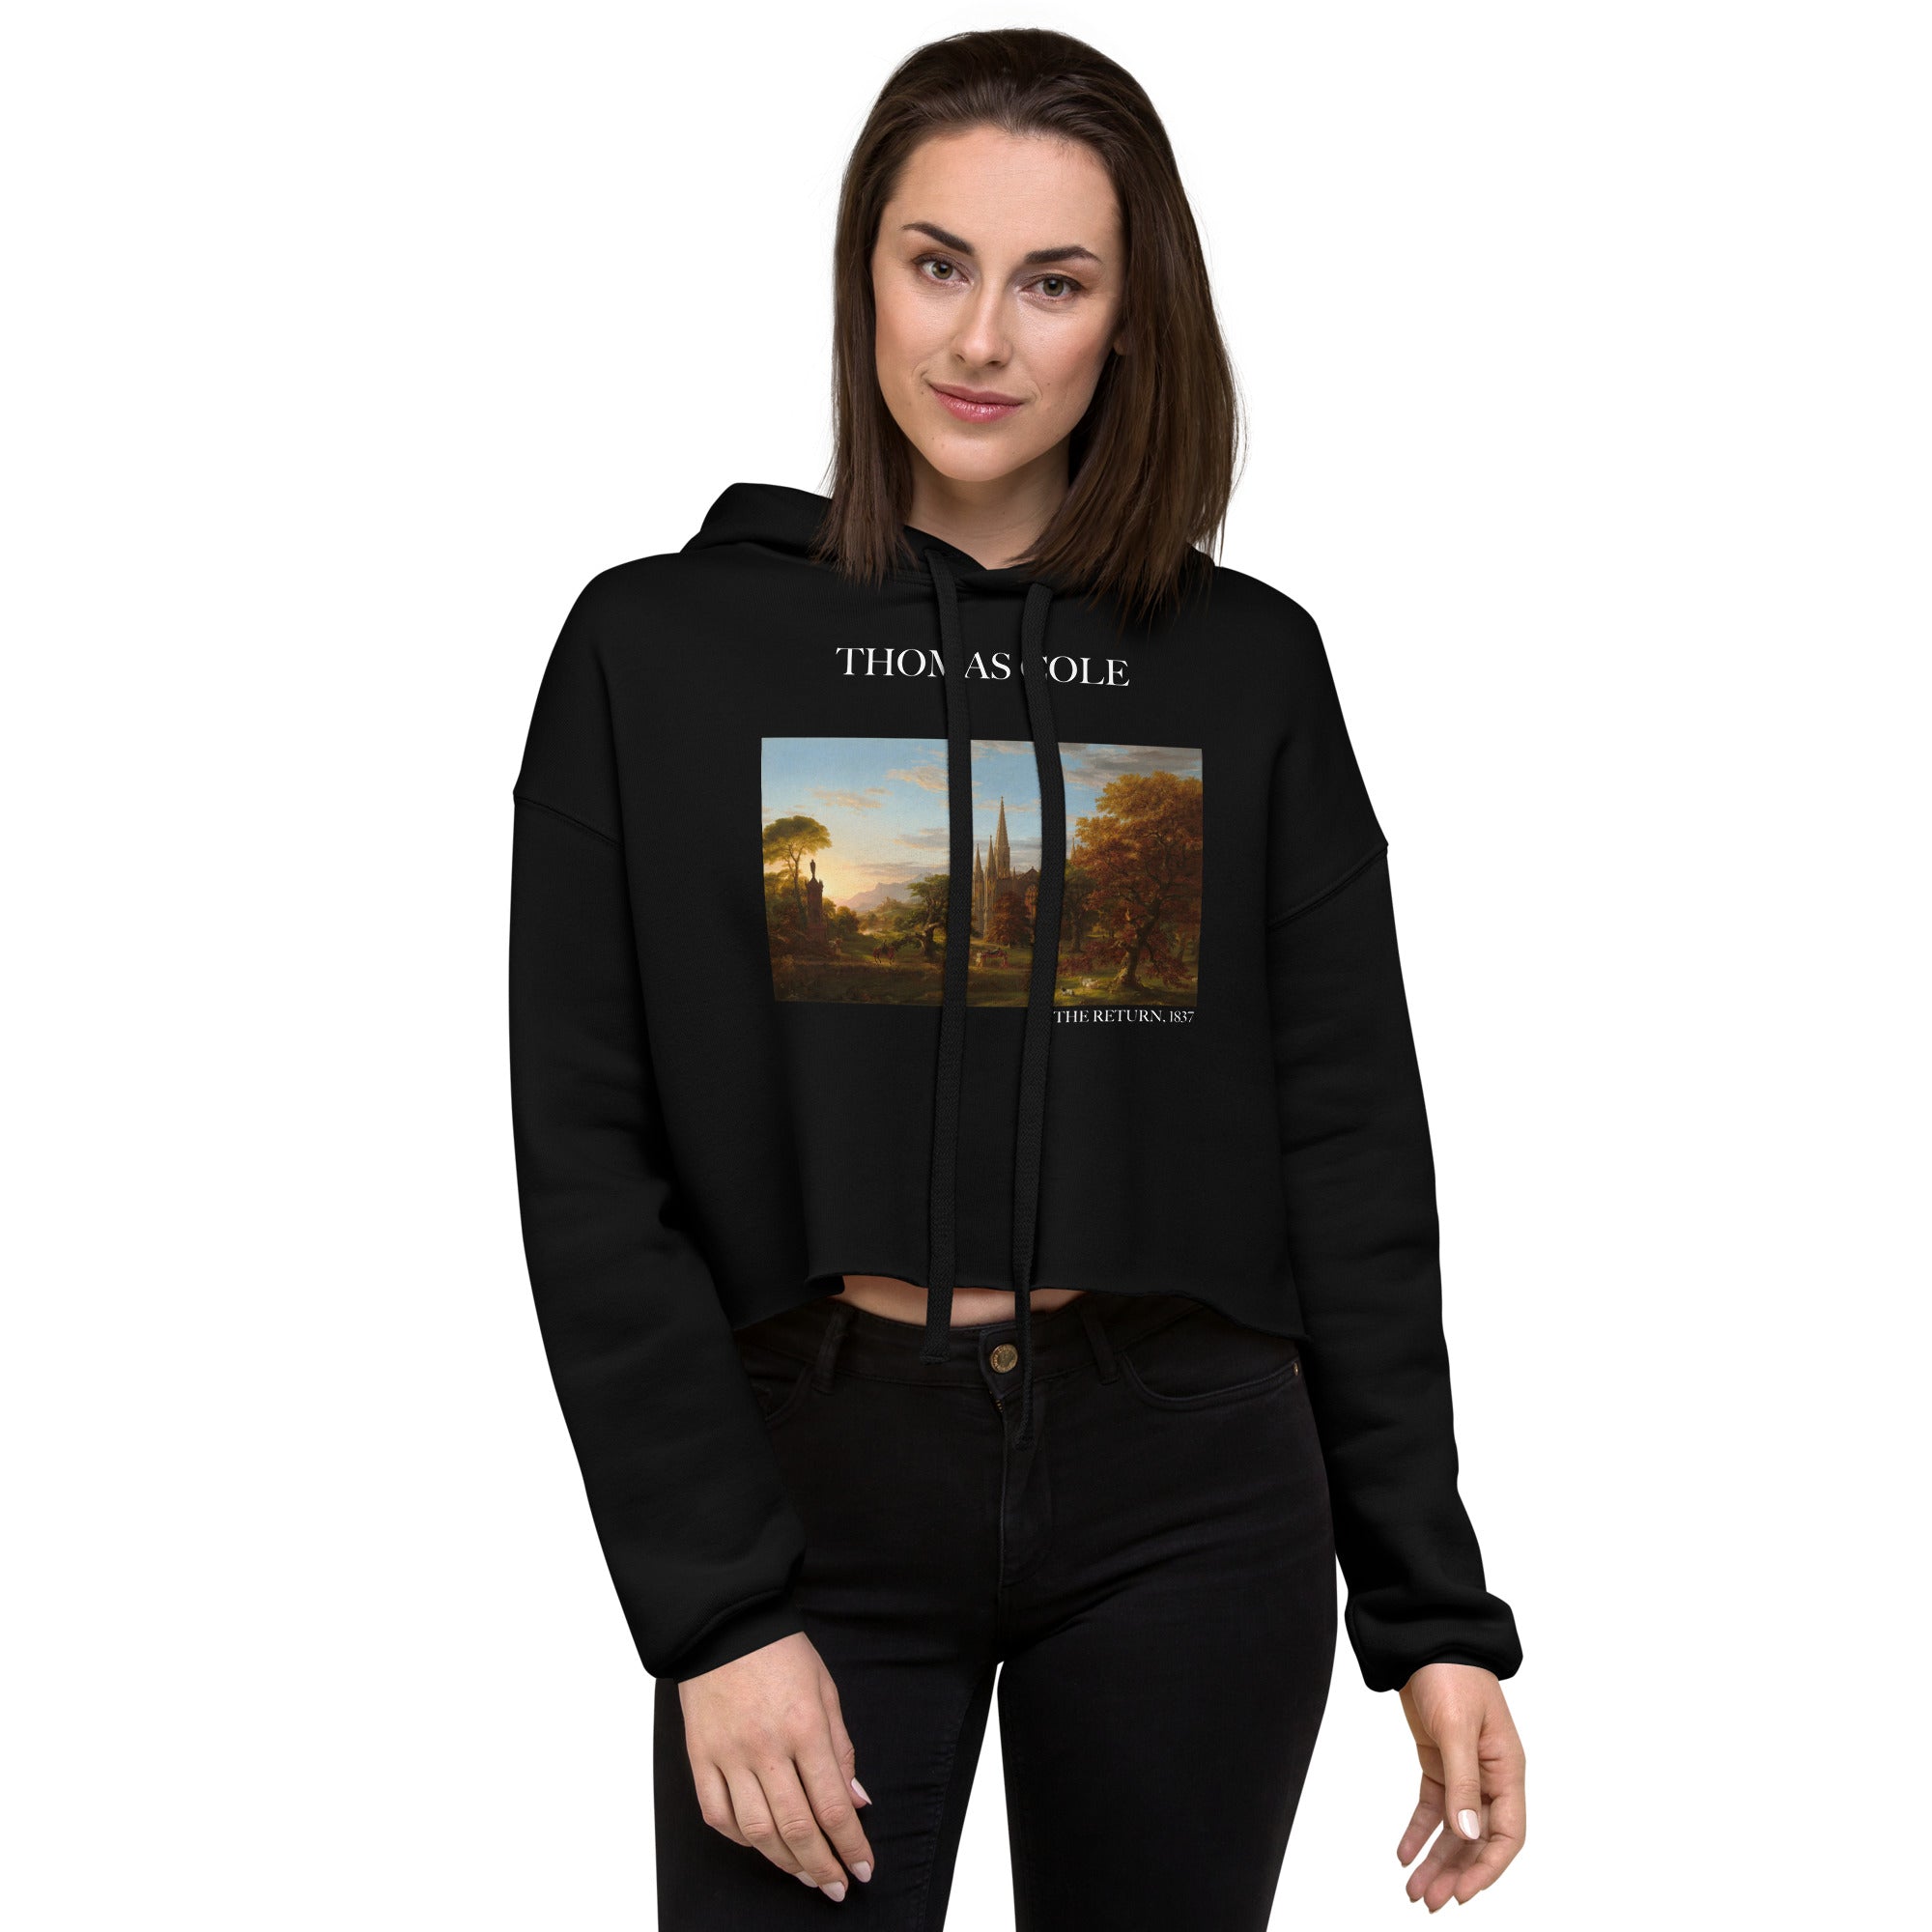 Thomas Cole 'The Return' Famous Painting Cropped Hoodie | Premium Art Cropped Hoodie